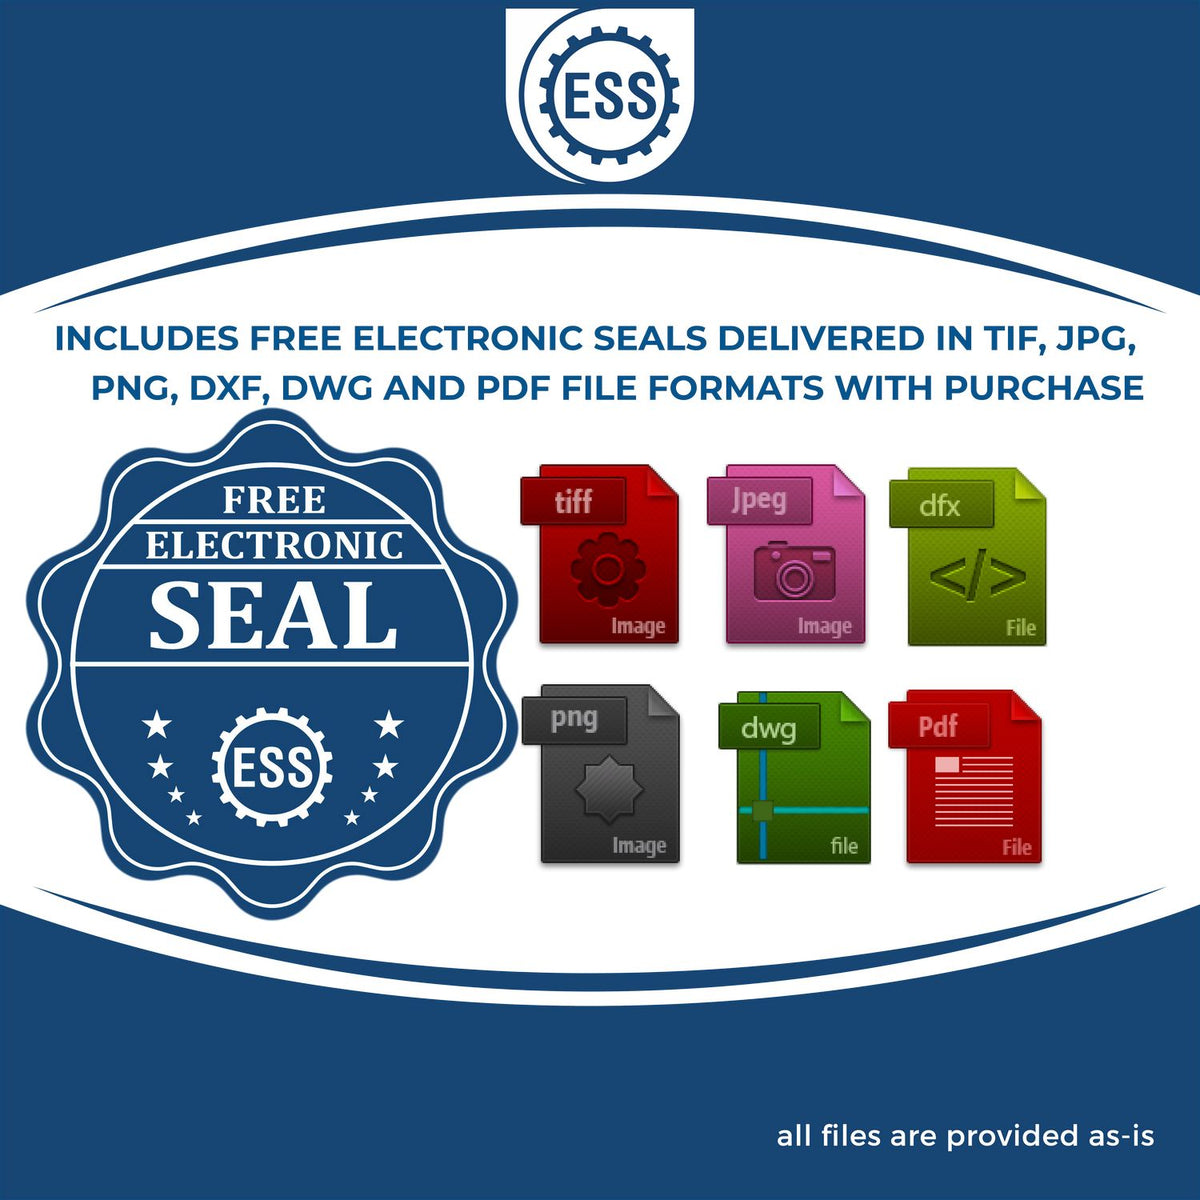 An infographic for the free electronic seal for the Long Reach Nebraska Land Surveyor Seal illustrating the different file type icons such as DXF, DWG, TIF, JPG and PNG.